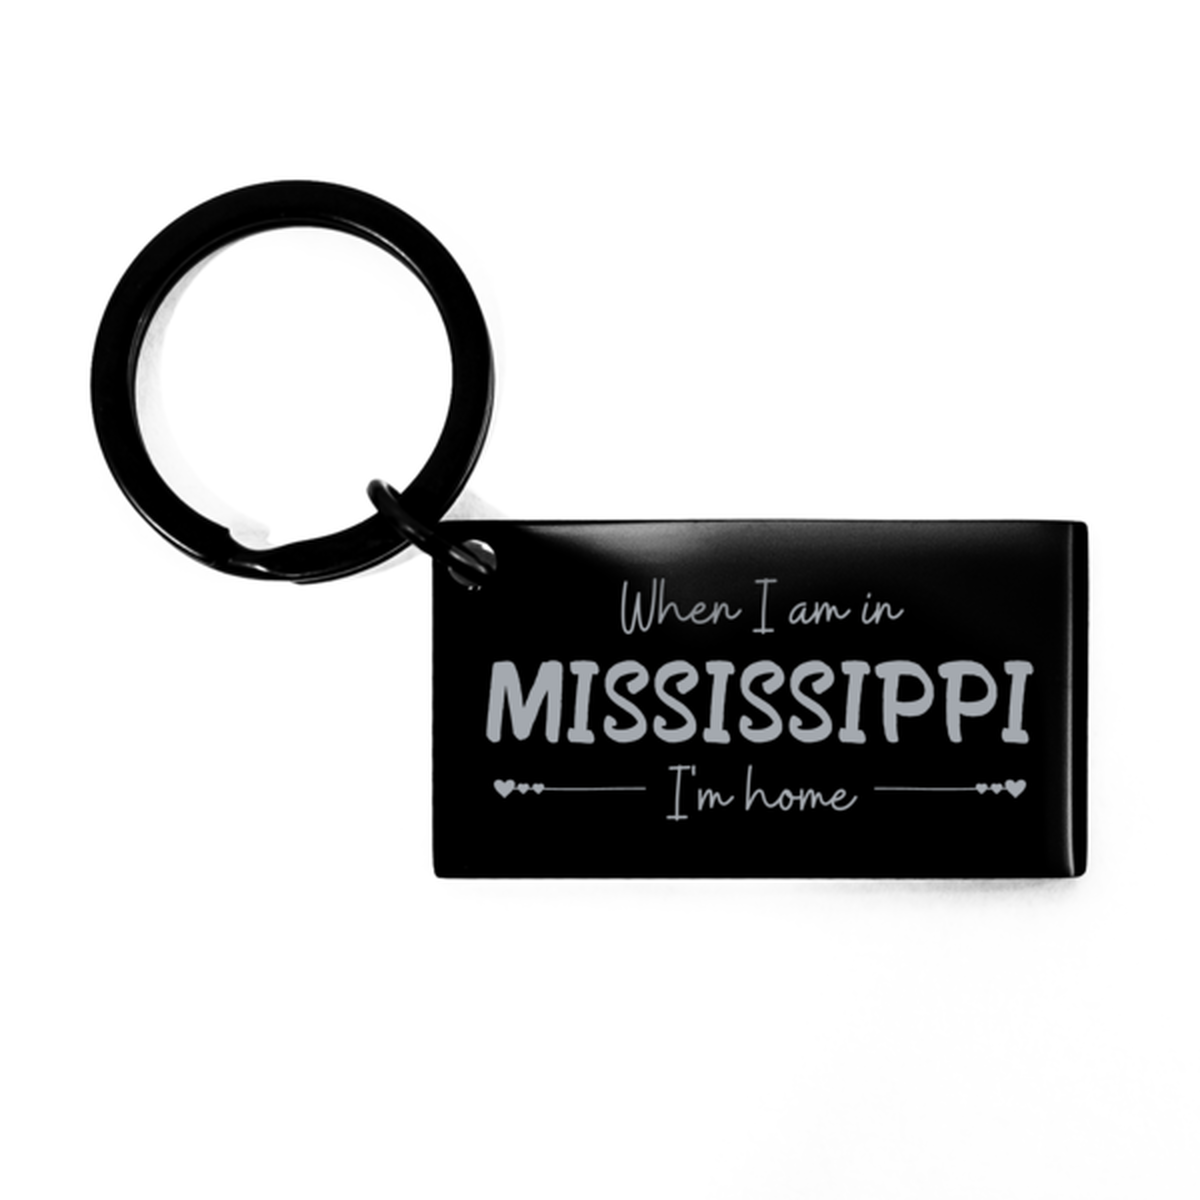 When I am in Mississippi I'm home Keychain, Cheap Gifts For Mississippi, State Mississippi Birthday Gifts for Friends Coworker